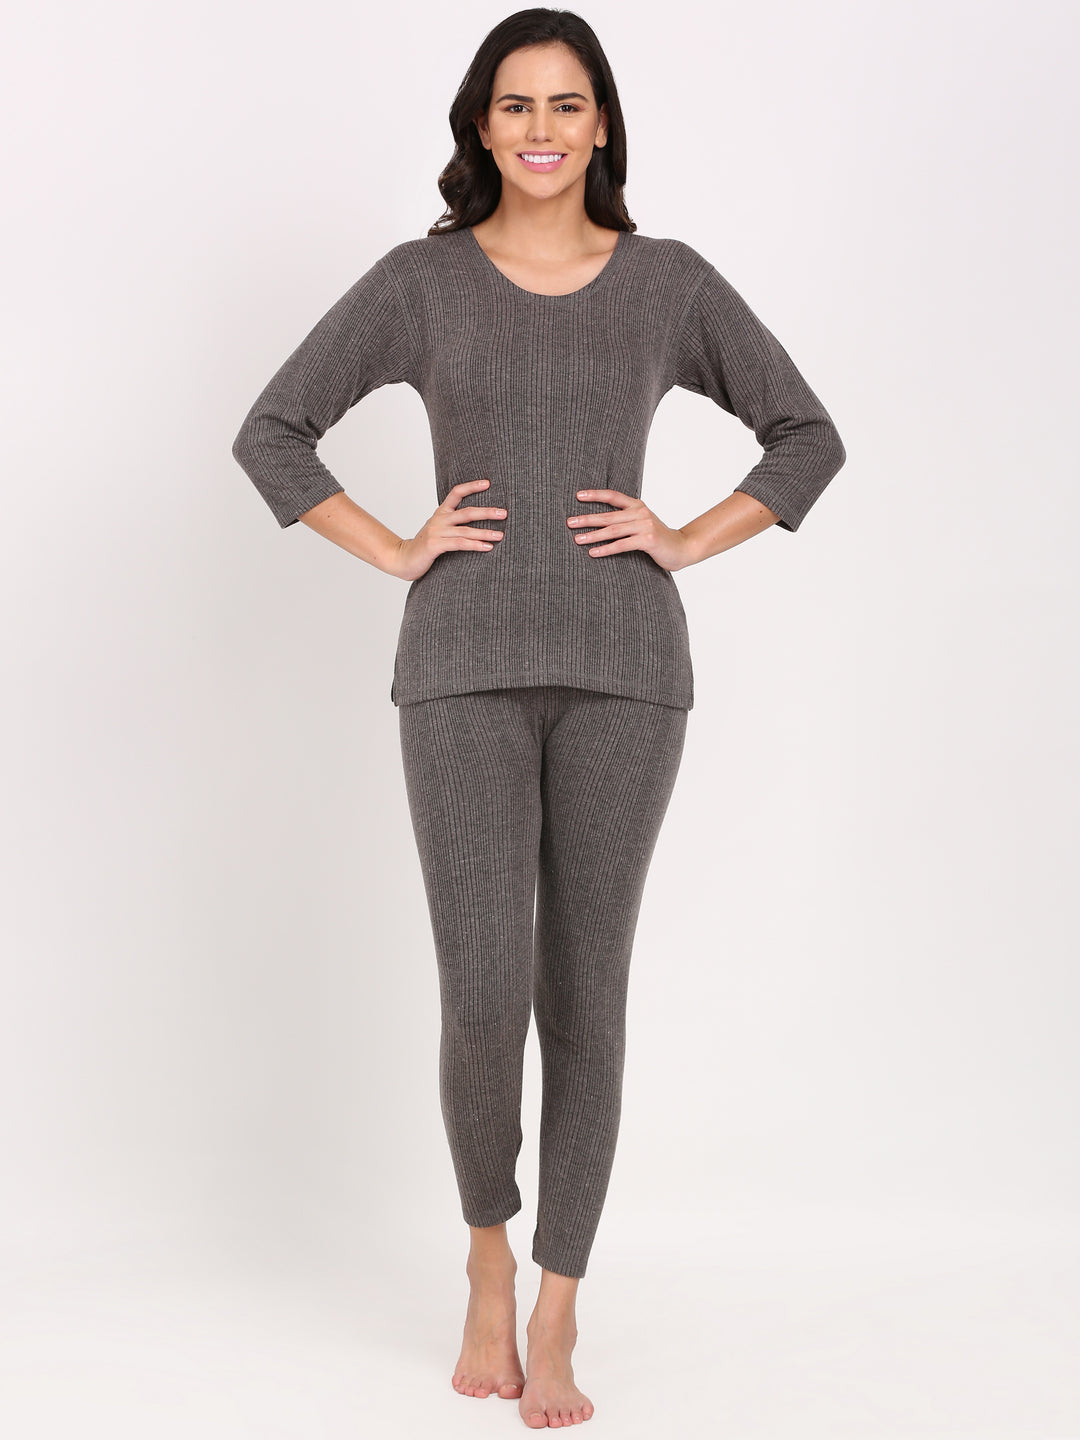 Touchwool Thermocot Women Thermal Wear Halfsleeve Manufacturer